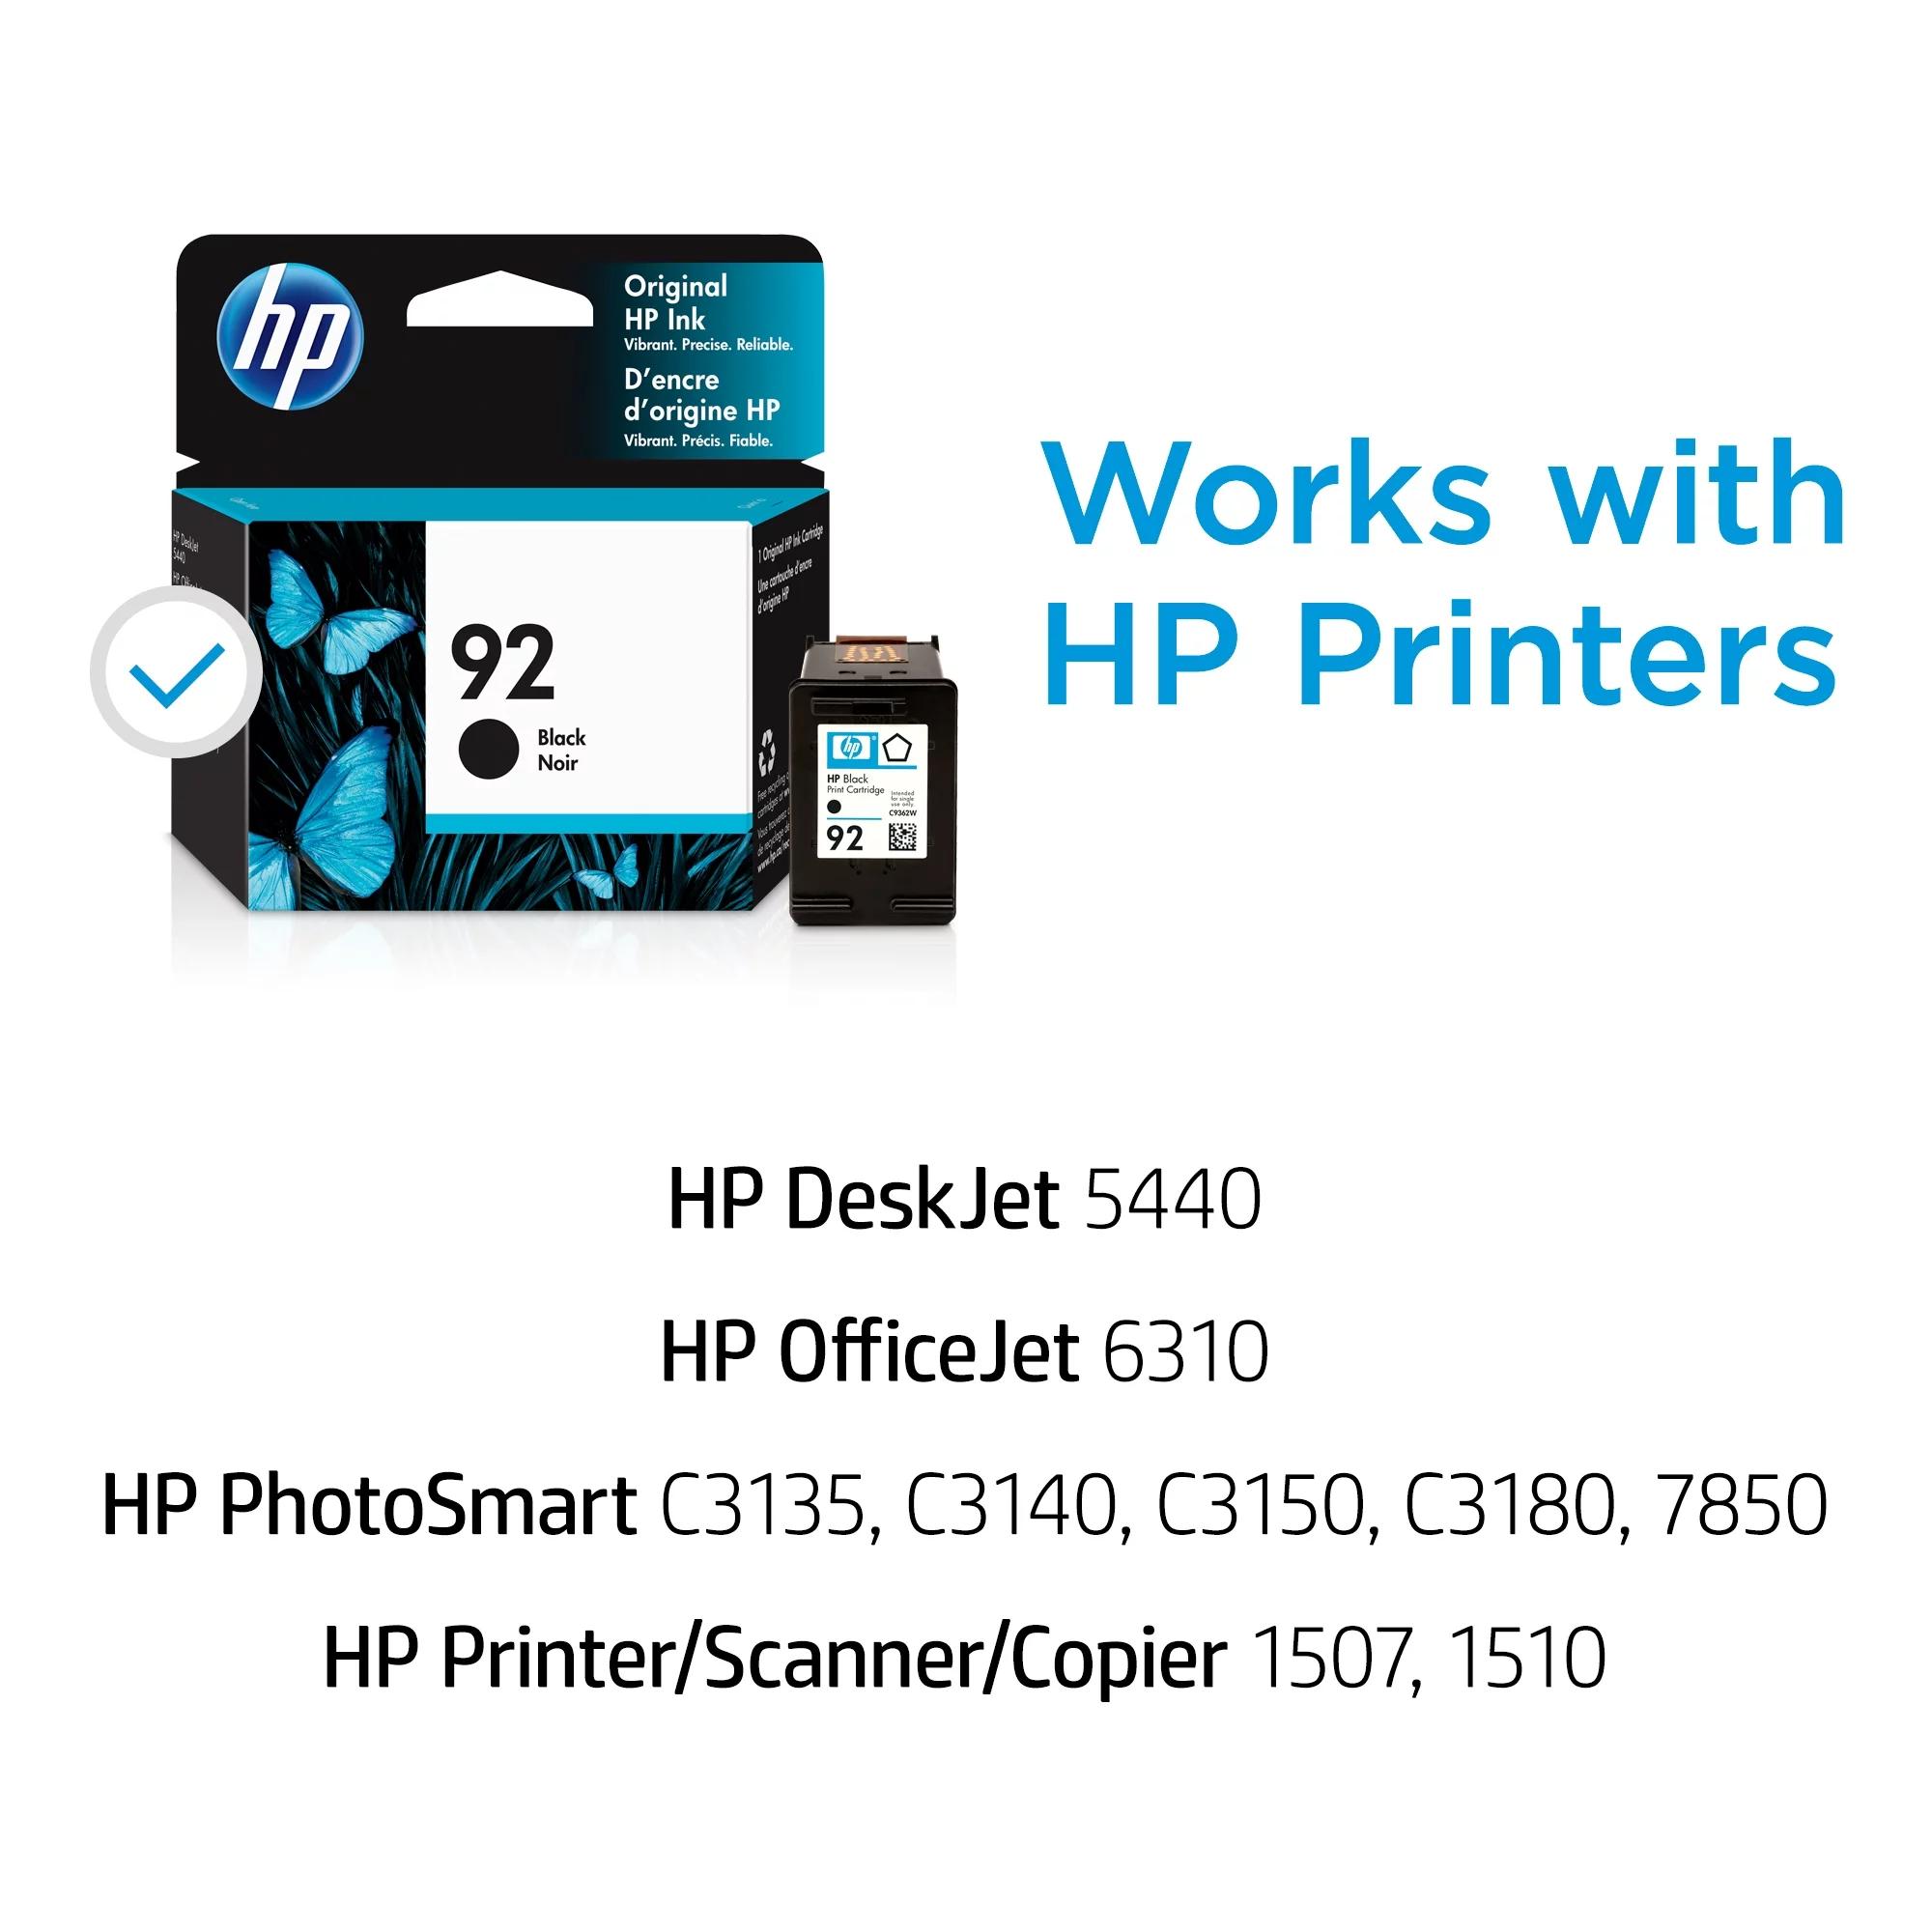 hewlett packard ink cartridges 92 93 - Which HP printers use 92 and 93 ink